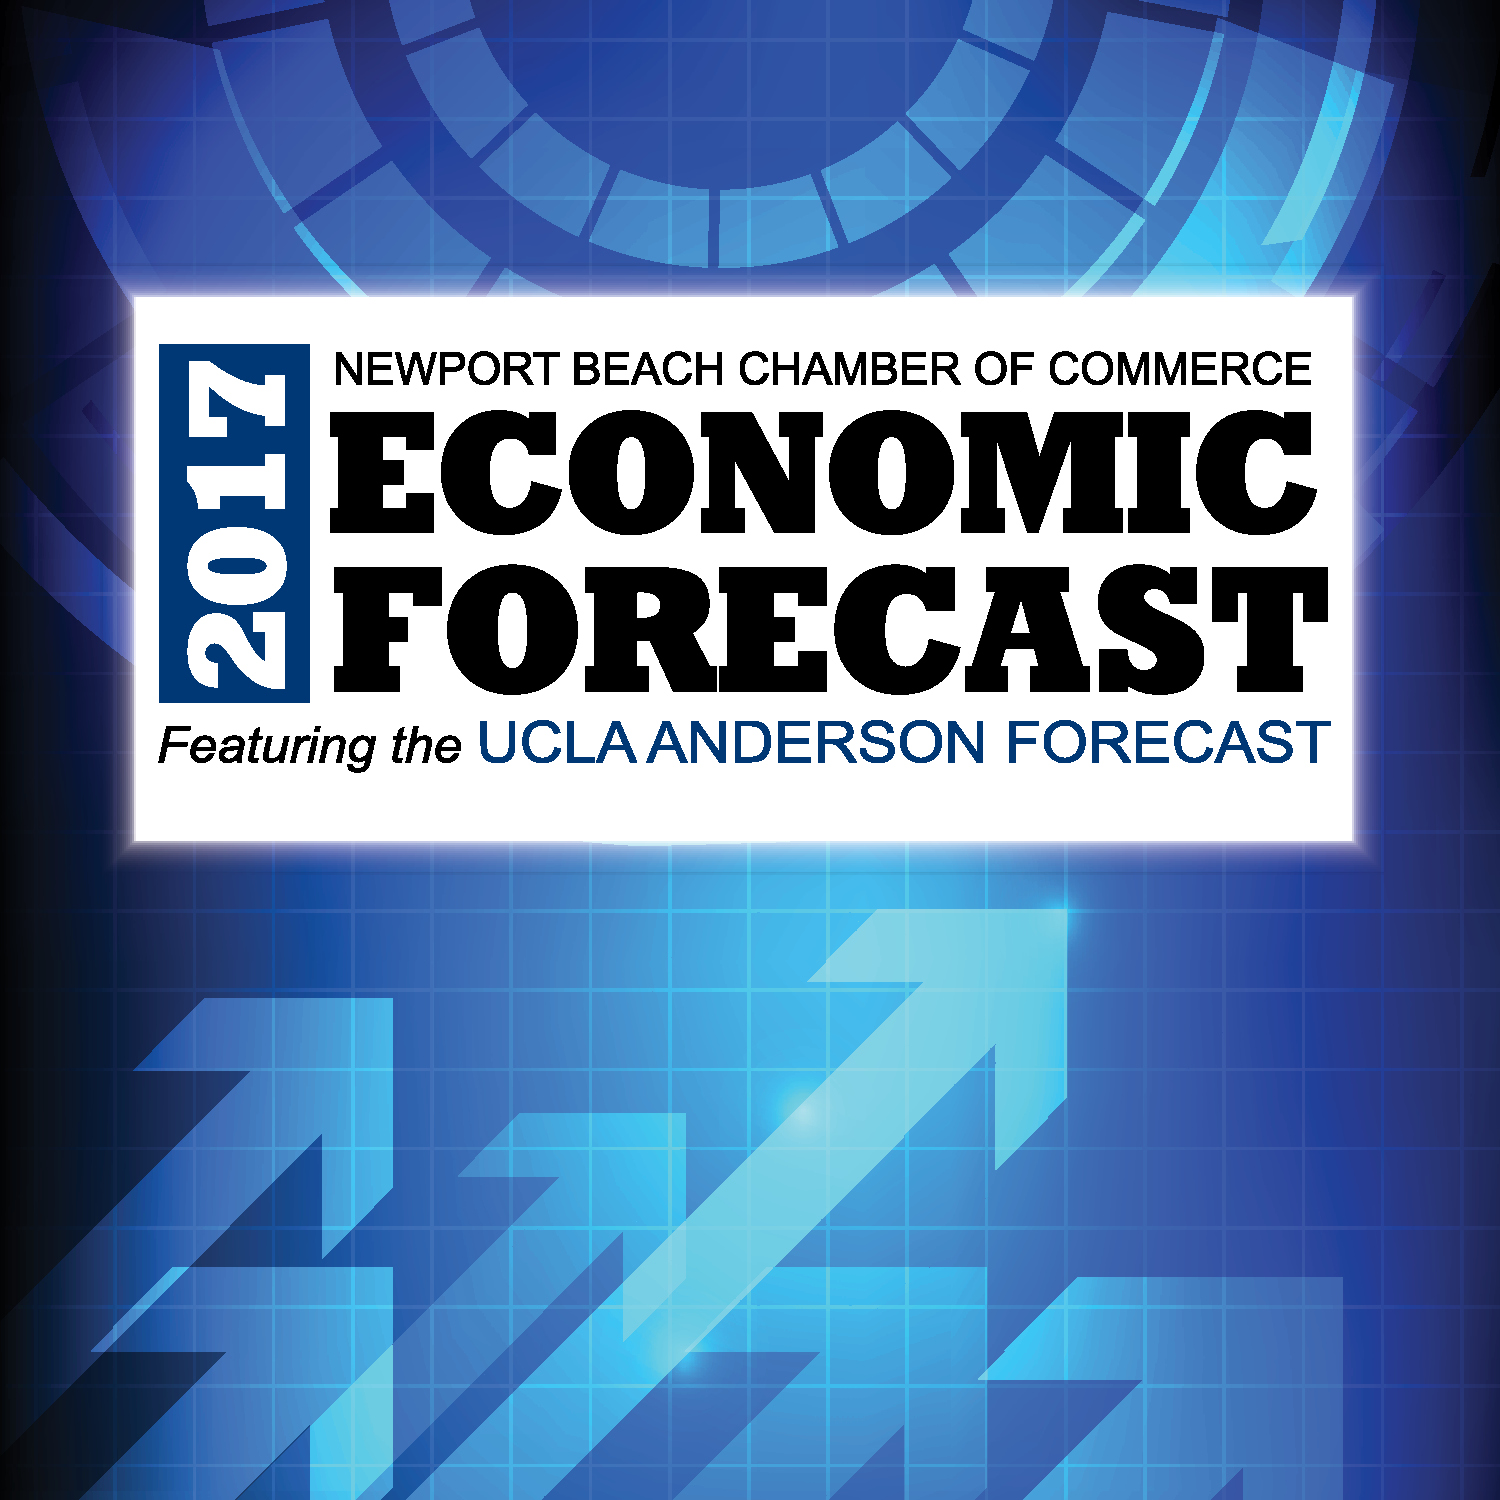 2017 Economic Forecast featuring the UCLA Anderson Forecast